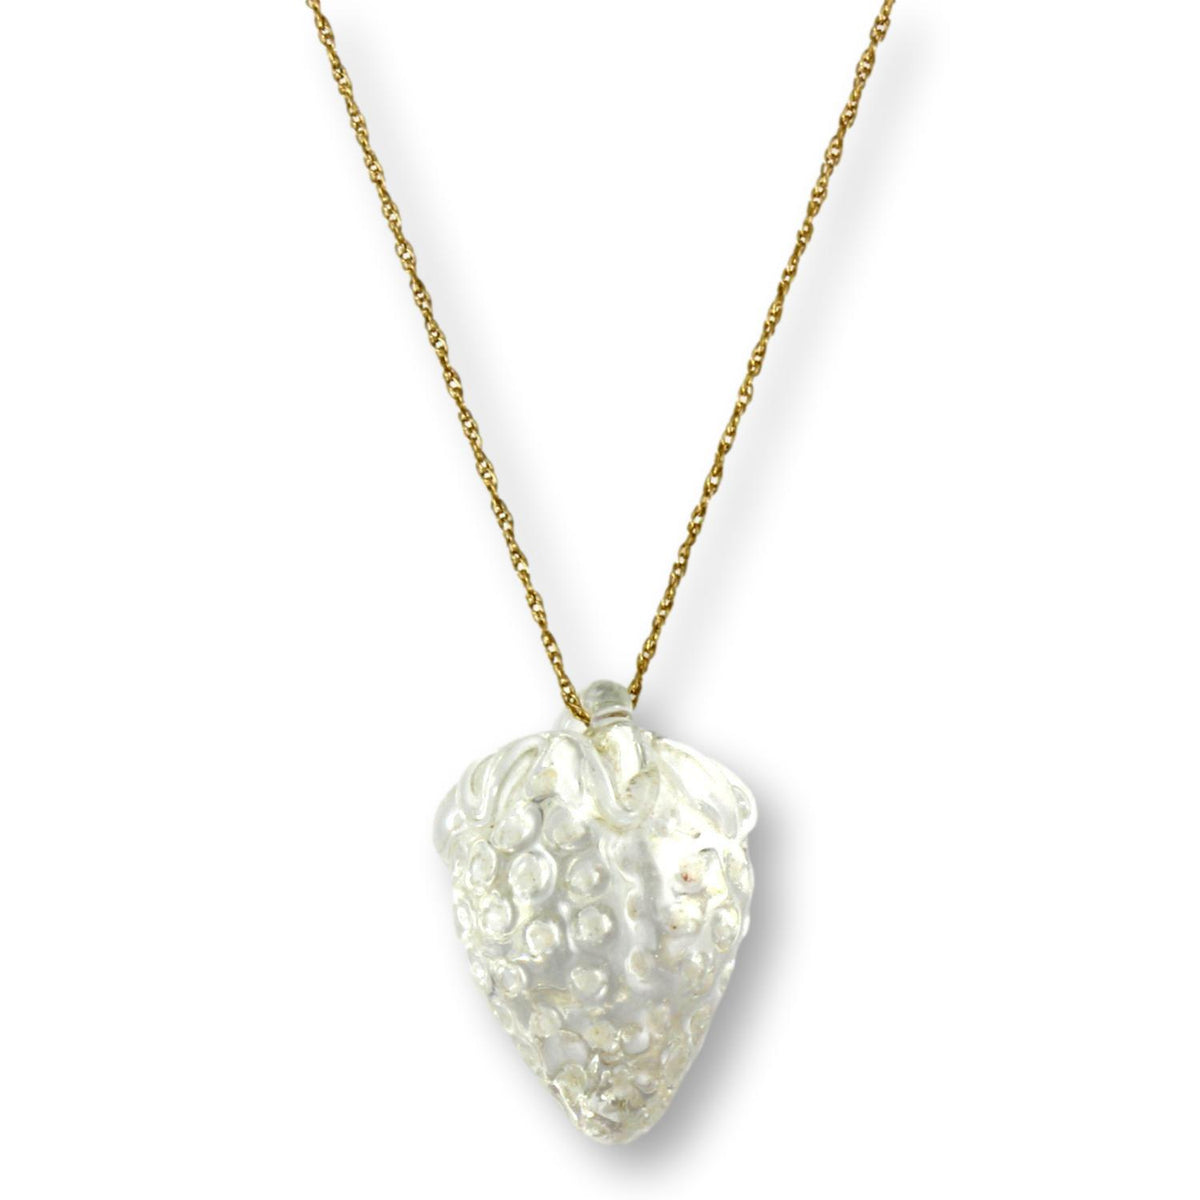 14K Gold Handsculpted Crystal Strawberry Pendant & Chain Necklace